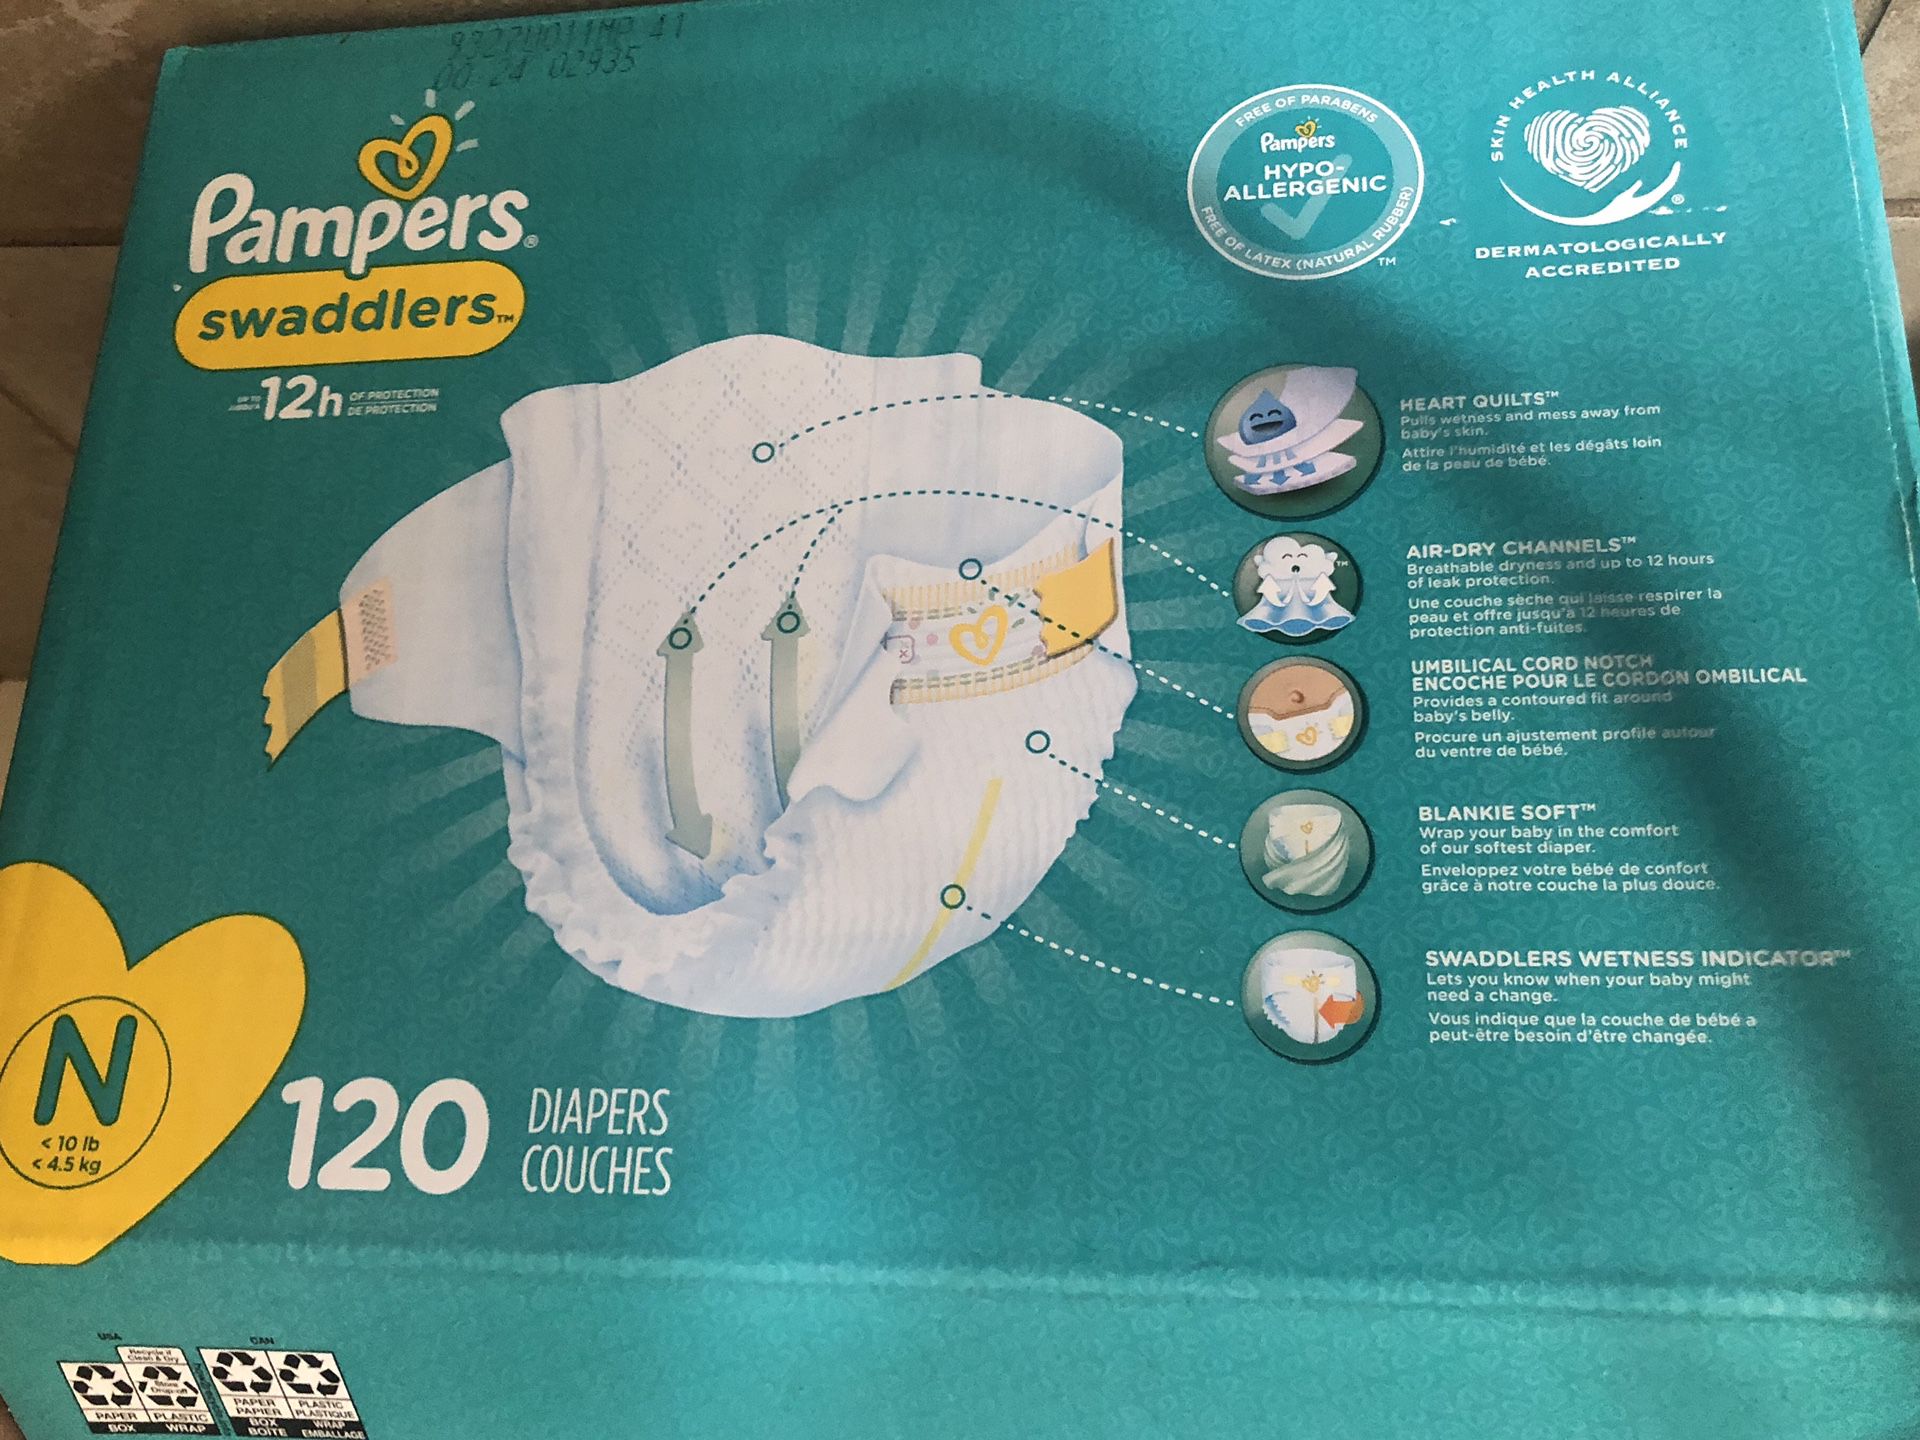 Box of Newborn Size Pampers diapers.